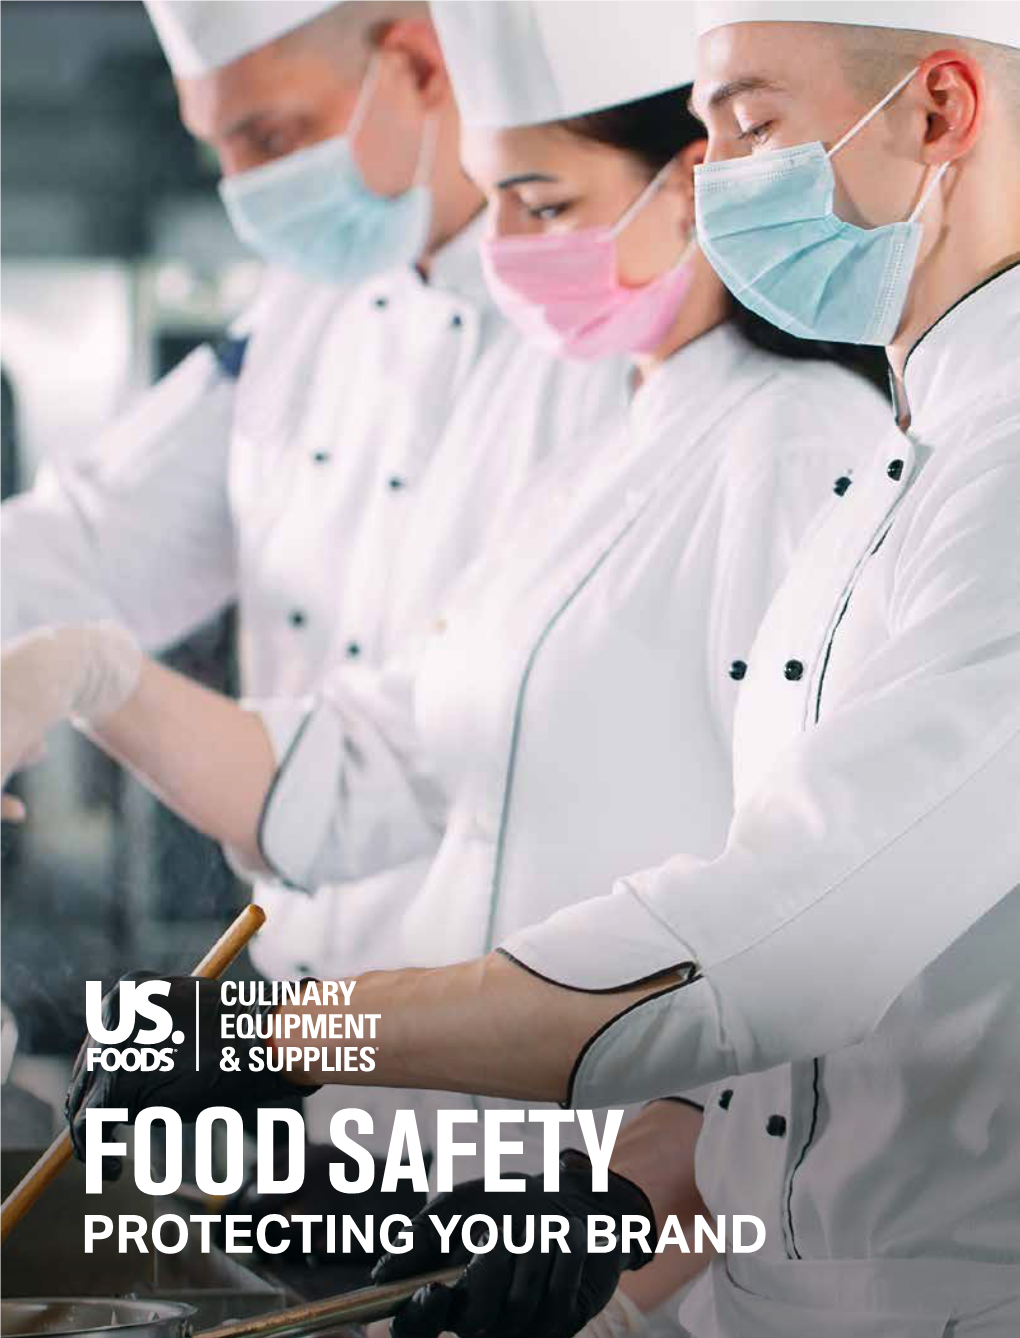 PROTECTING YOUR BRAND FOOD SAFETY Protect Your Brand